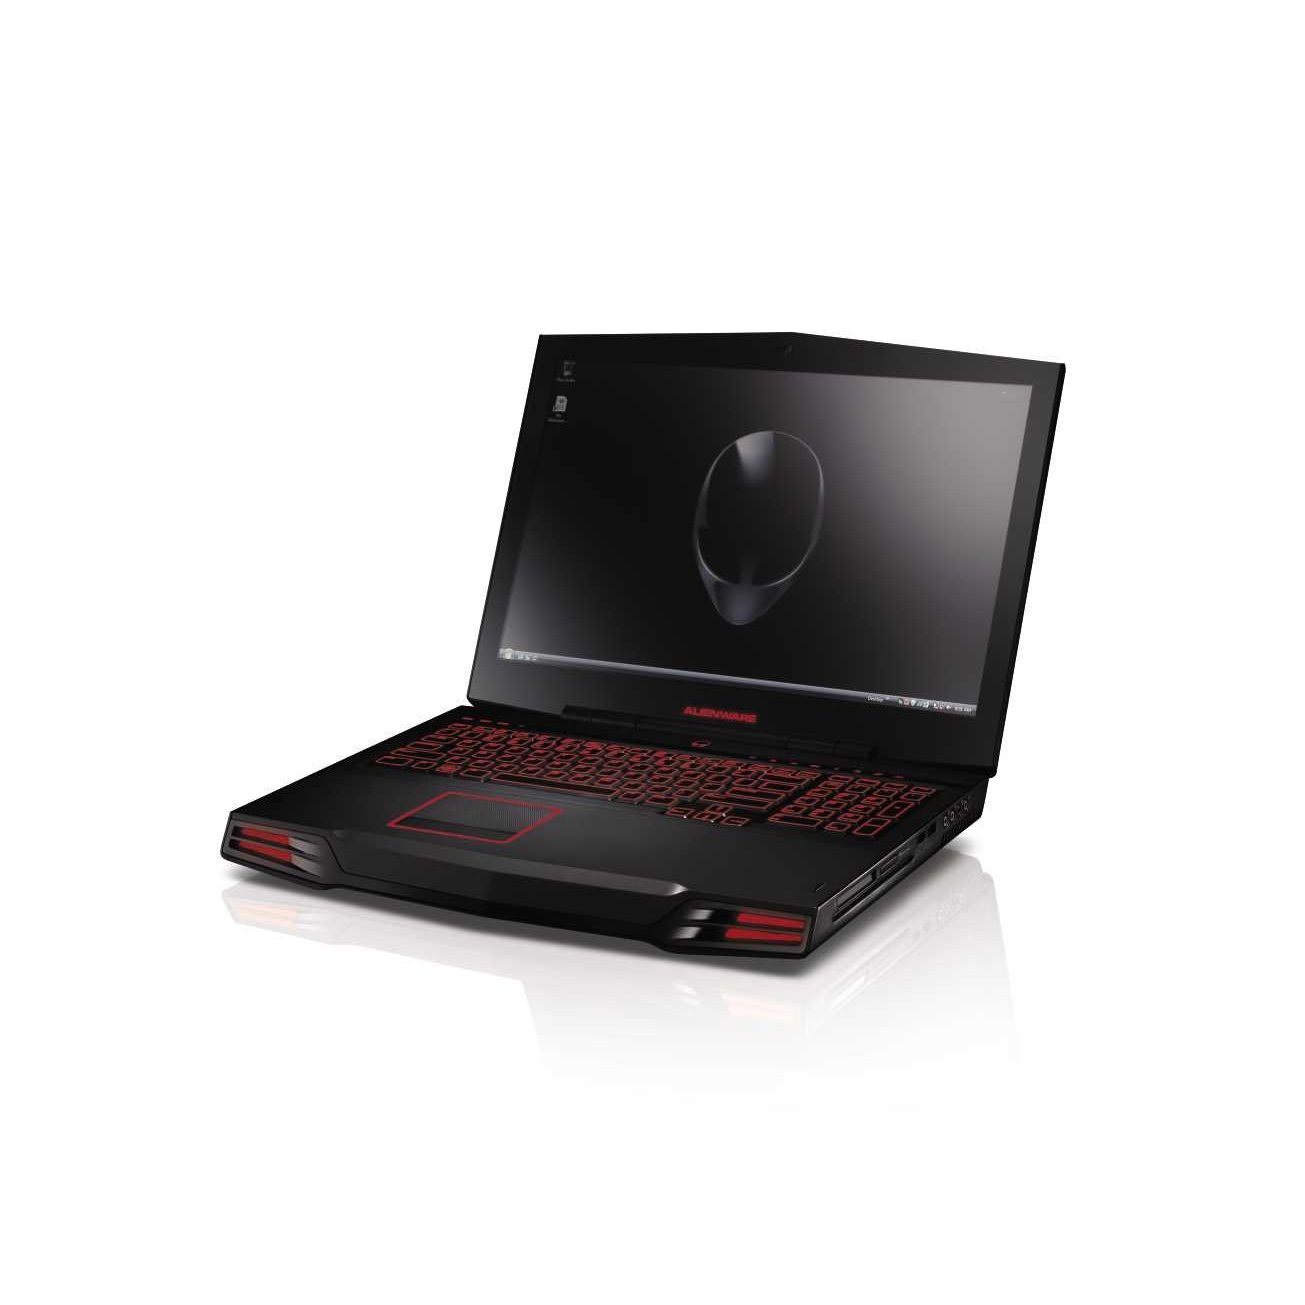 Alienware x14 R2 is a compact gaming laptop with Raptor Lake-H and